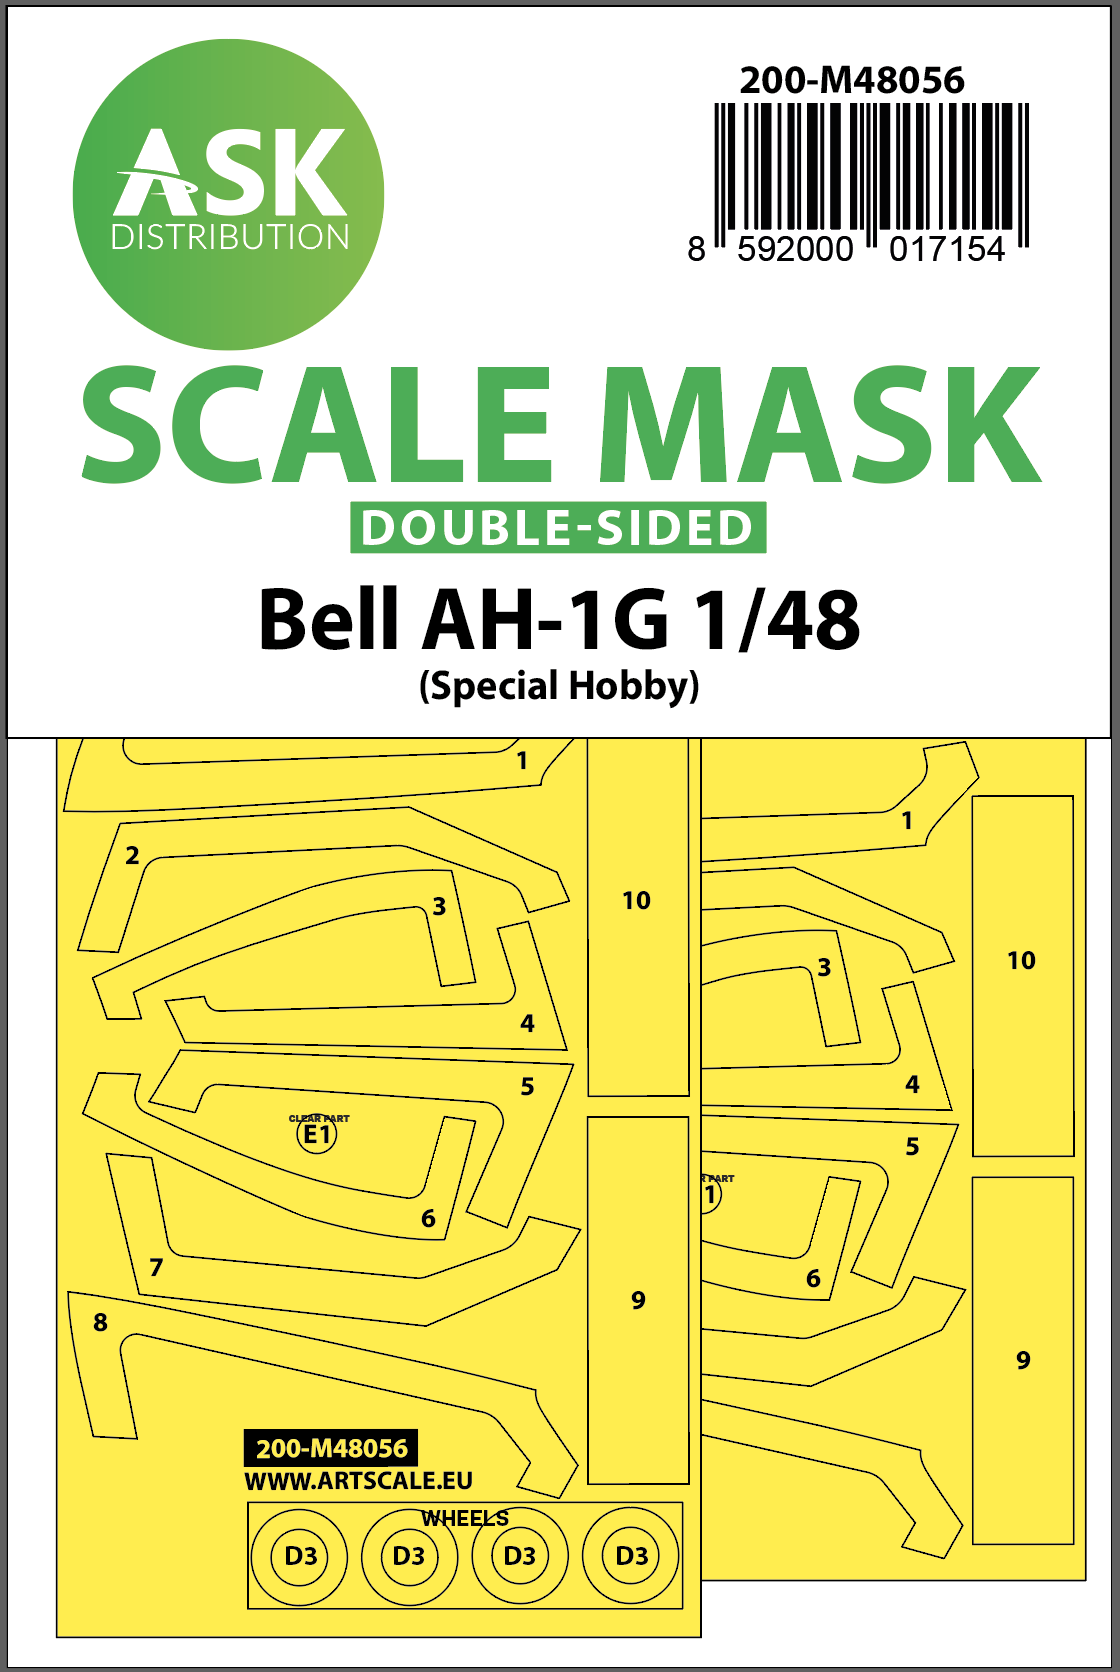 1/48 Bell AH-1G double-sided express mask for Special Hobby